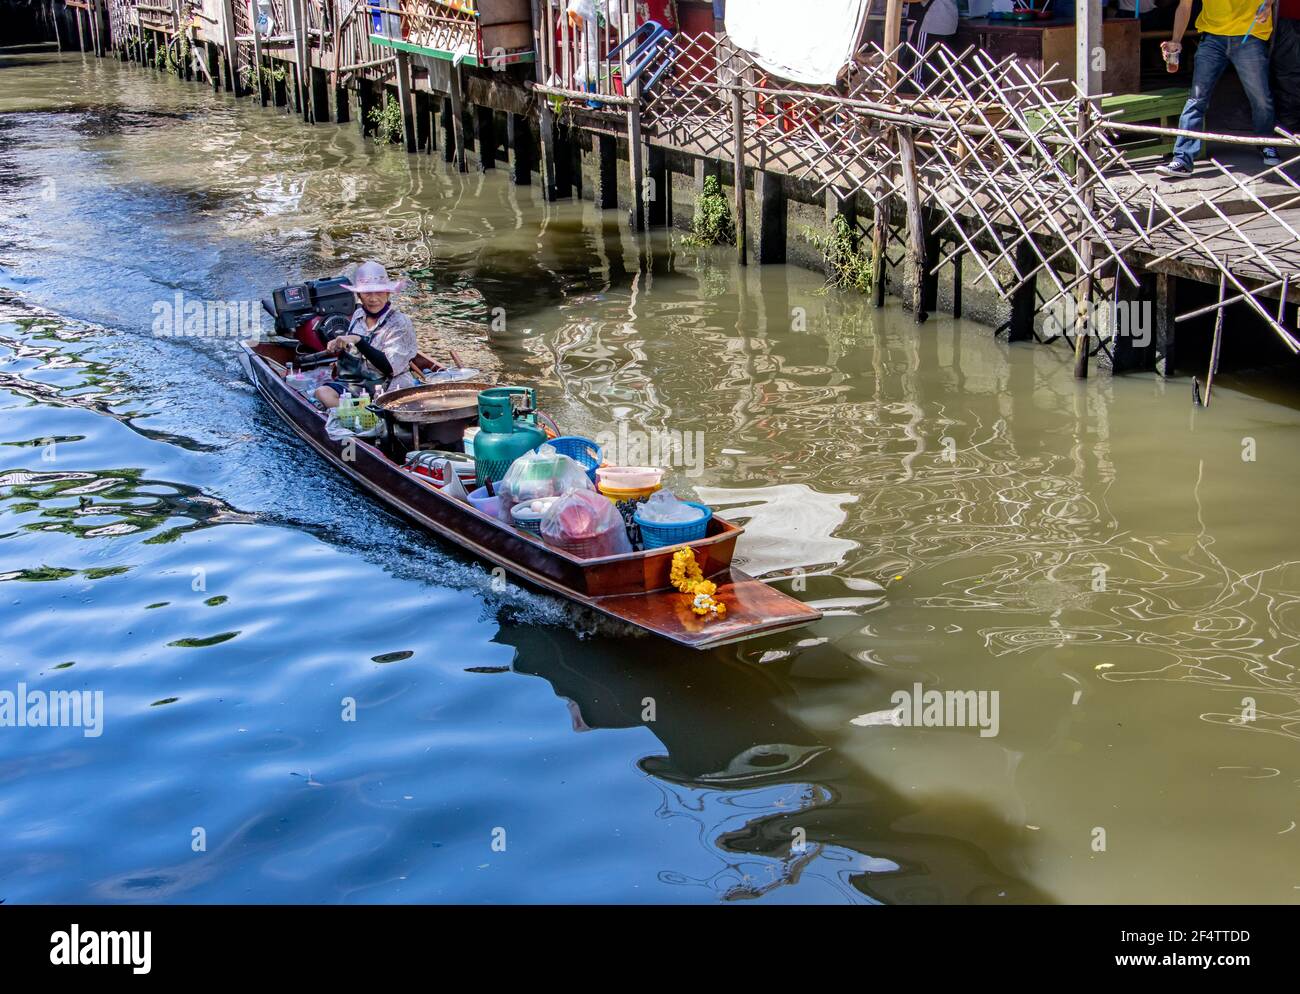 BANGKOK, THAILAND, JUNE 20 2020, The boat with the kitchen moving in the water canal of the floating market Stock Photo